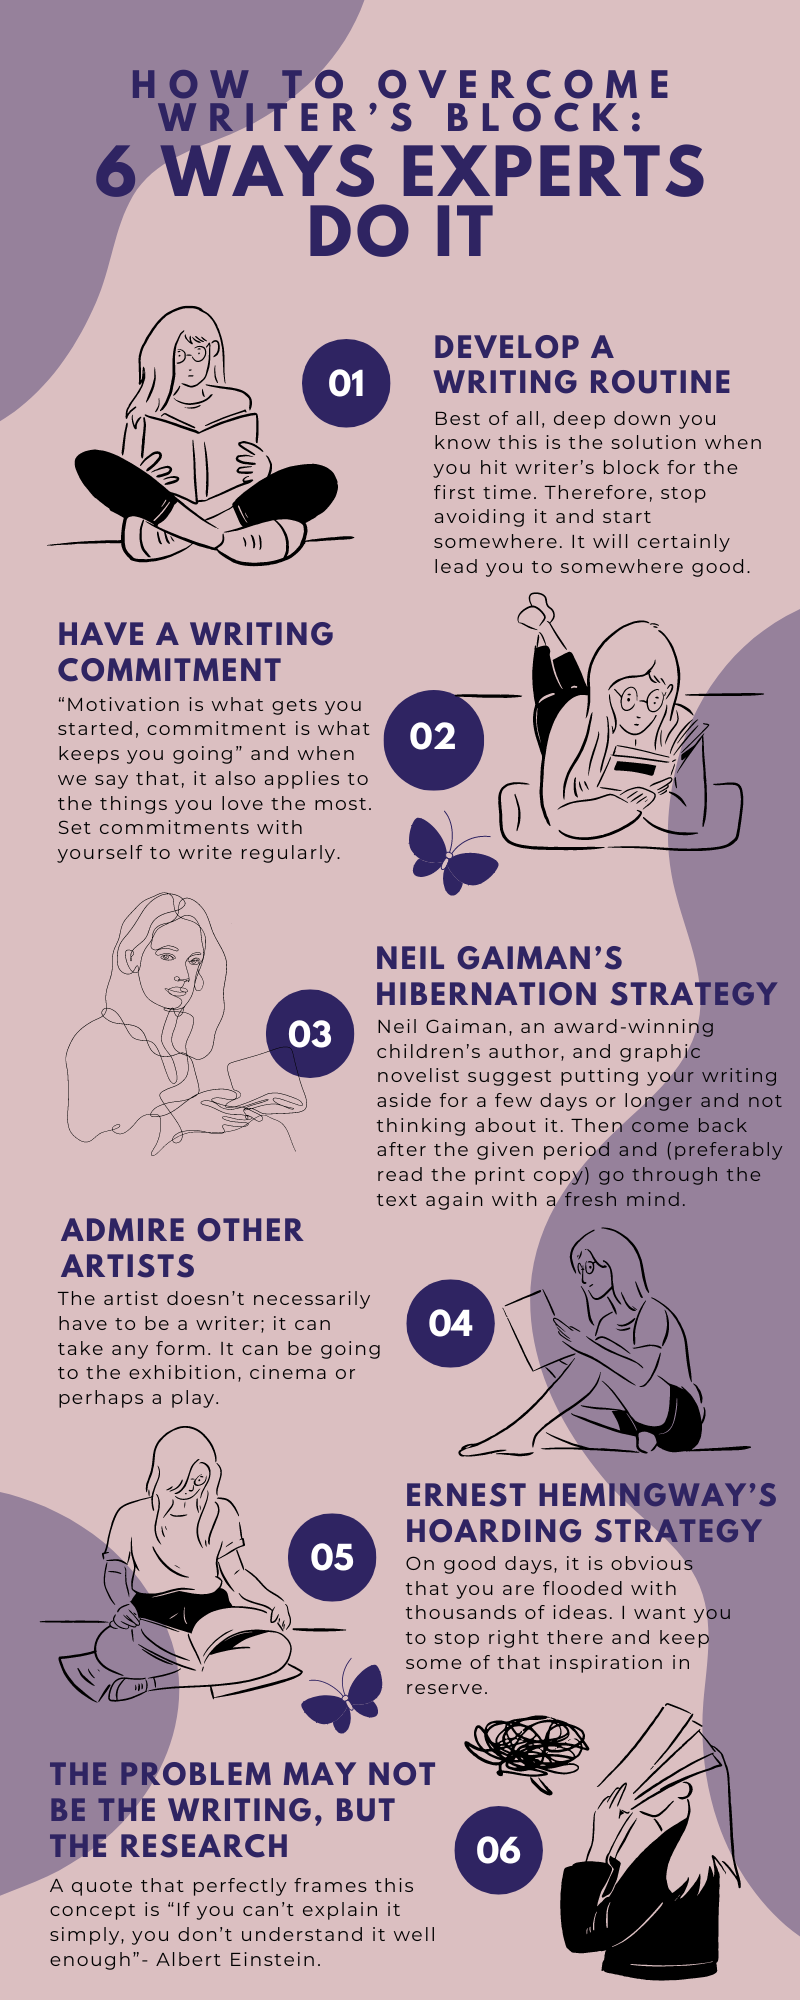 How To Overcome Writer’s Block: 6 Ways Experts Do It